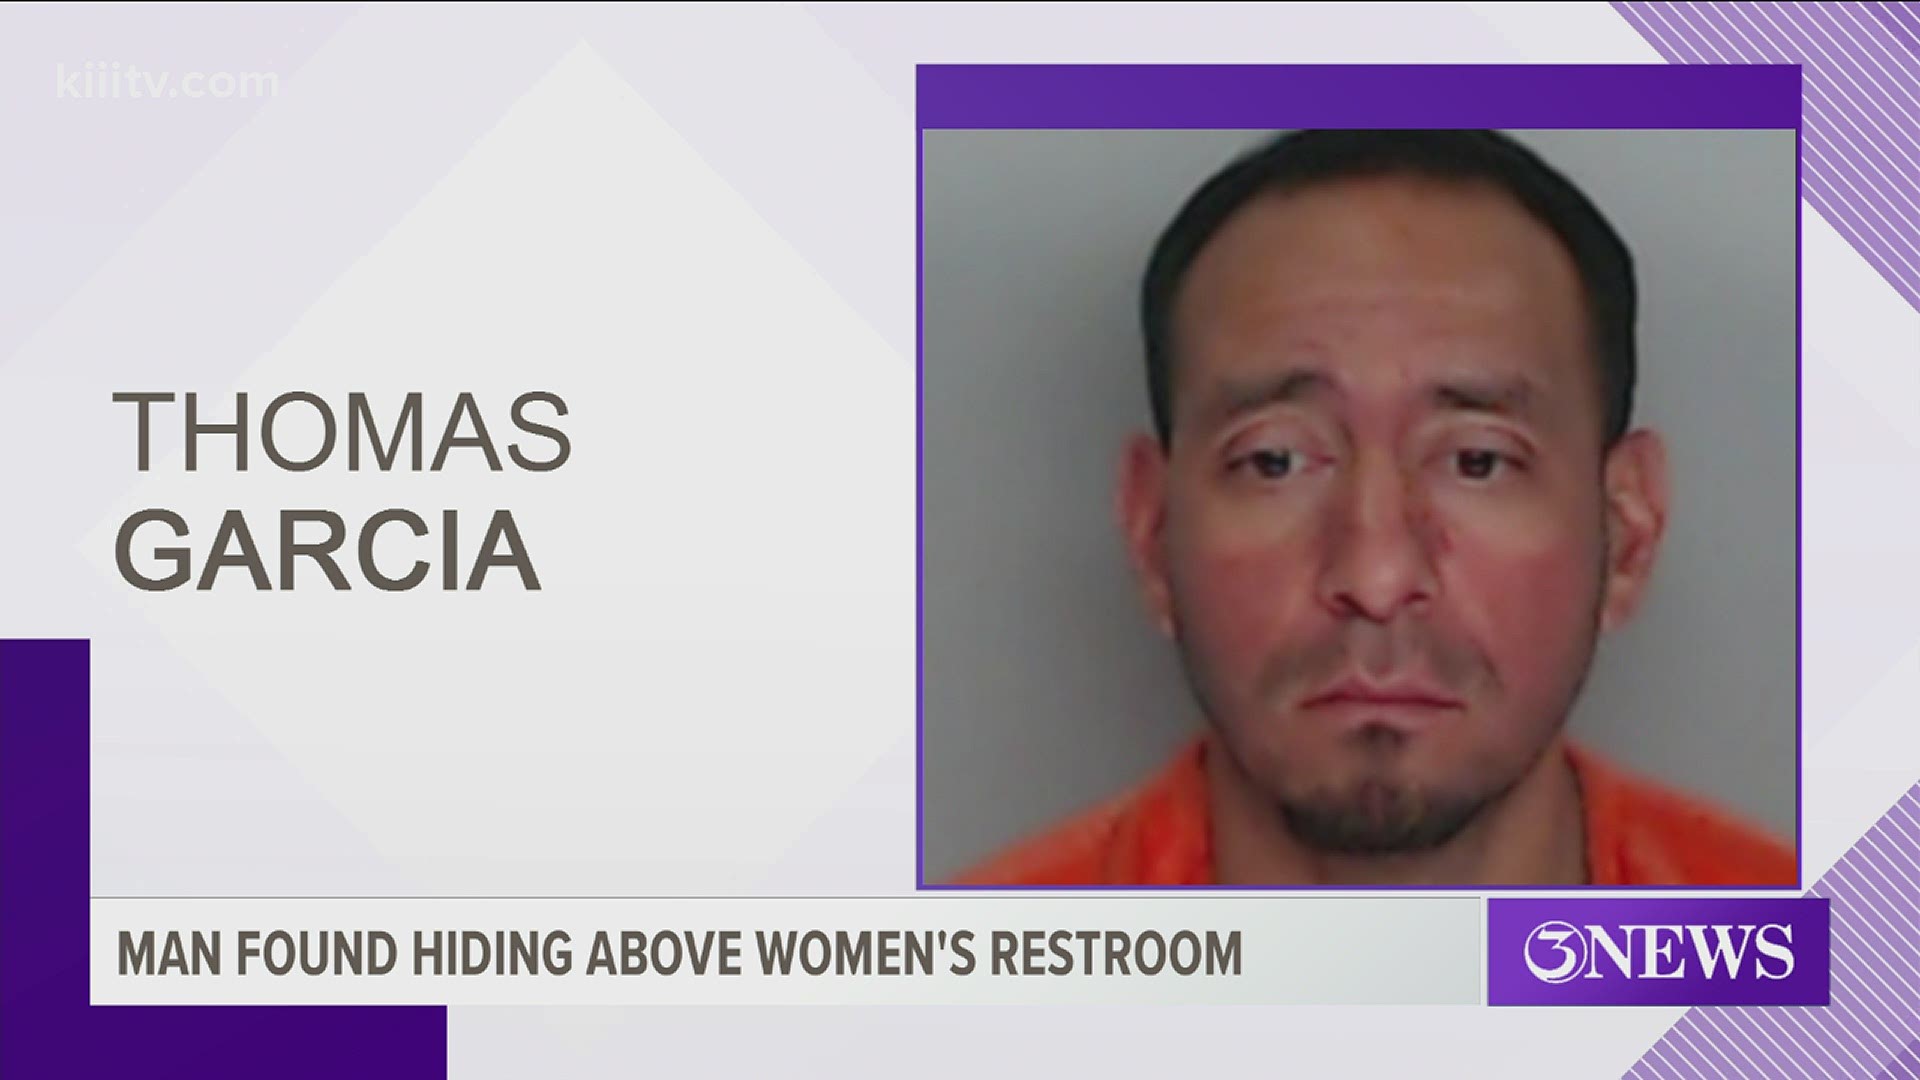 44-year-old Thomas Garcia is now facing charges of burglary of a building, criminal mischief and voyeurism.